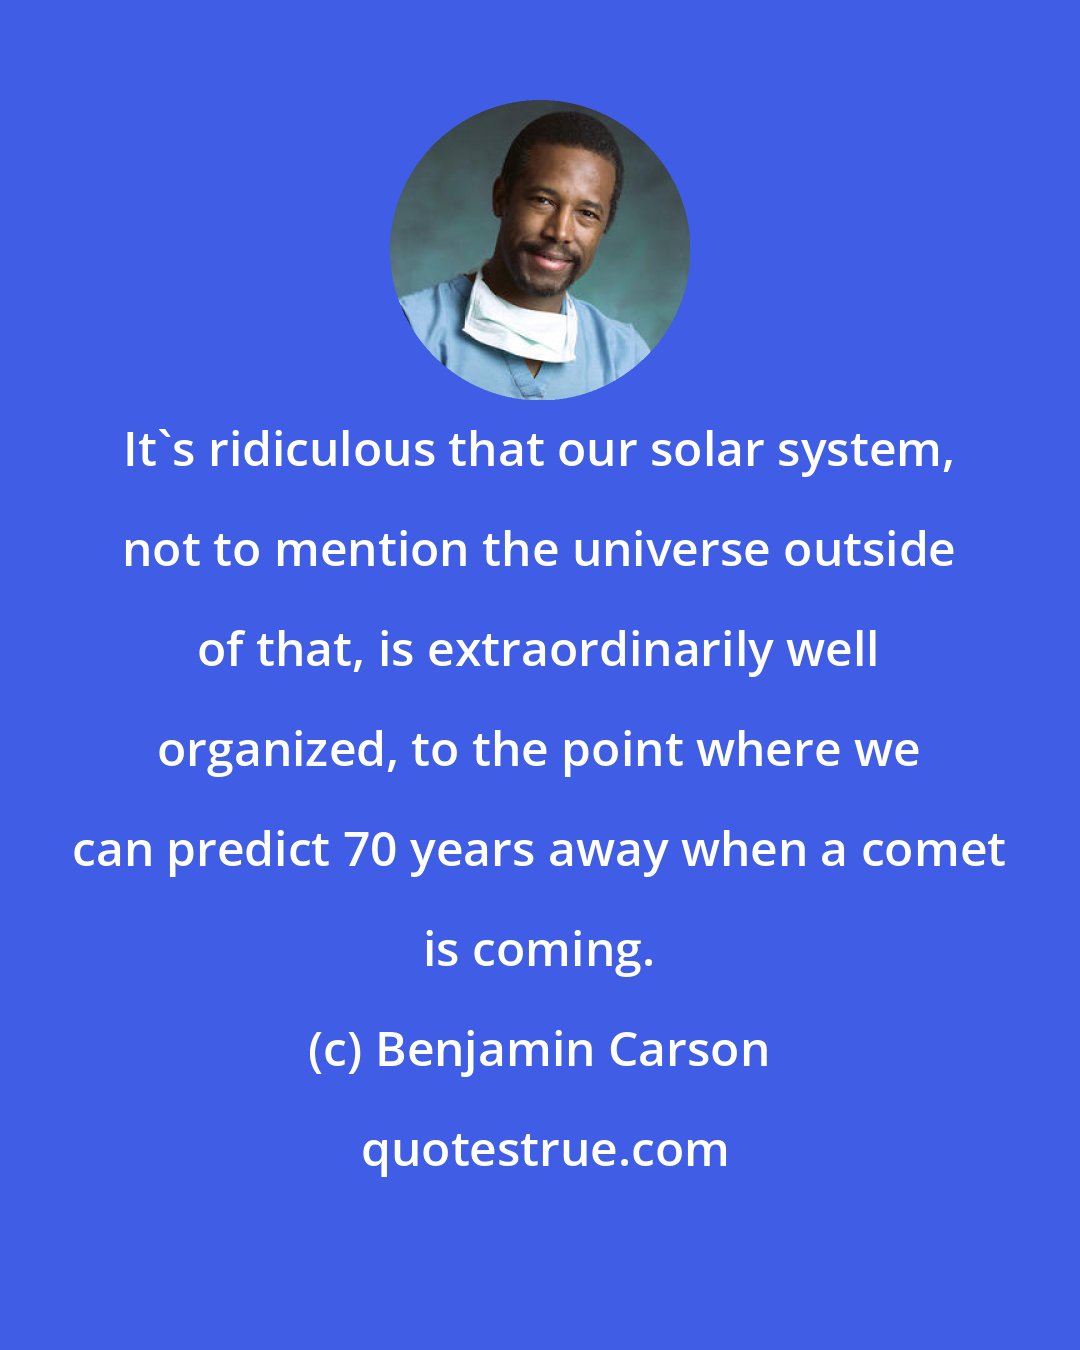 Benjamin Carson: It's ridiculous that our solar system, not to mention the universe outside of that, is extraordinarily well organized, to the point where we can predict 70 years away when a comet is coming.